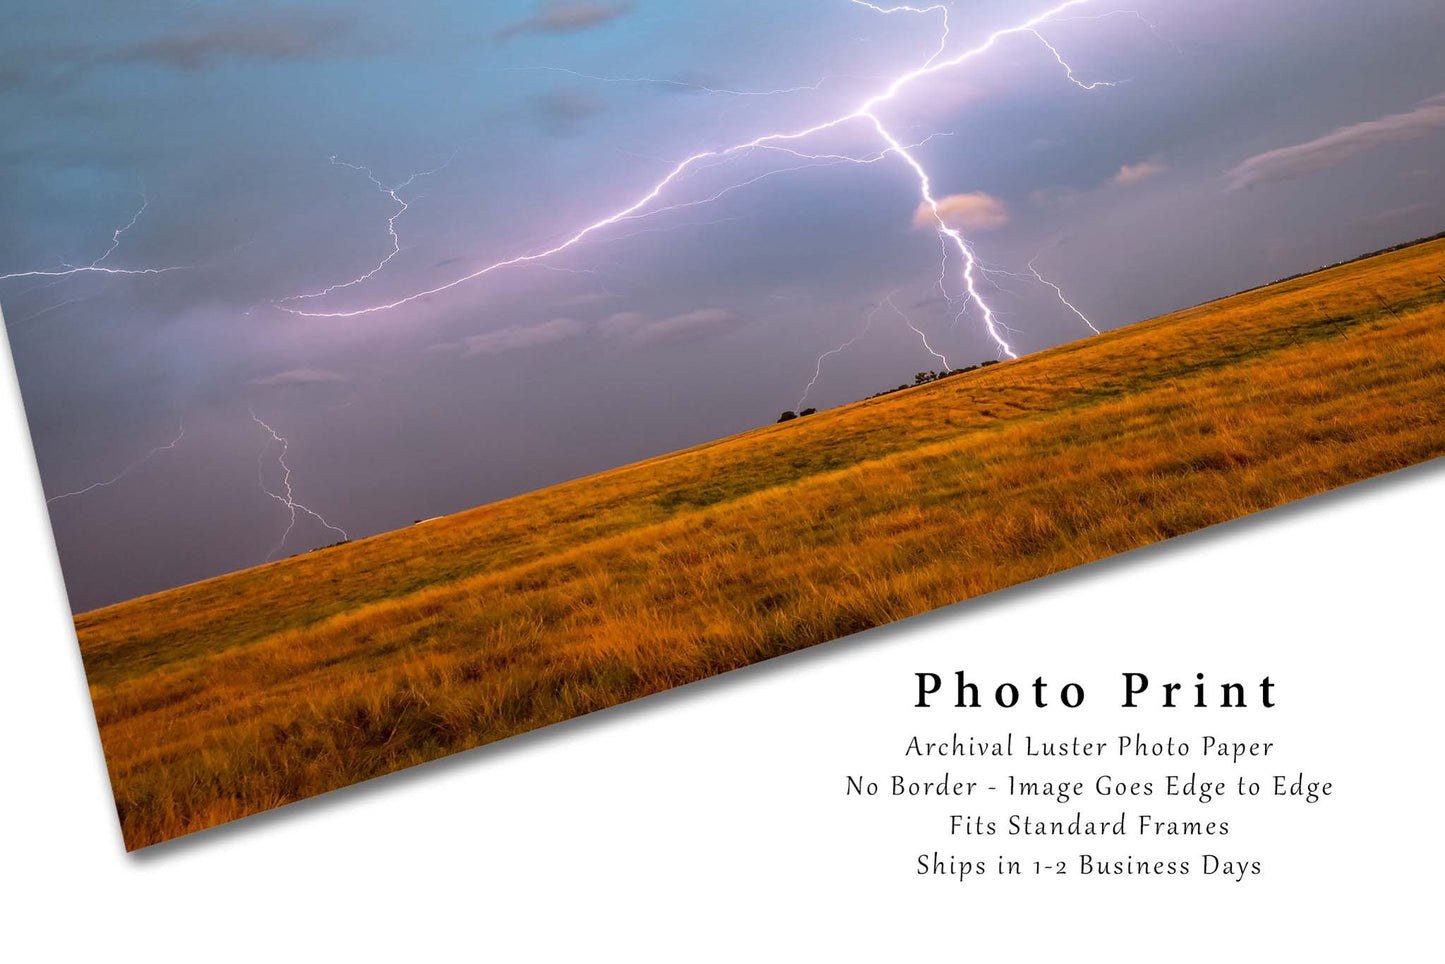 Storm Wall Art - Picture of Lightning Spanning Horizon at Dusk in Oklahoma - Weather Photography Photo Print Wall Art Decor